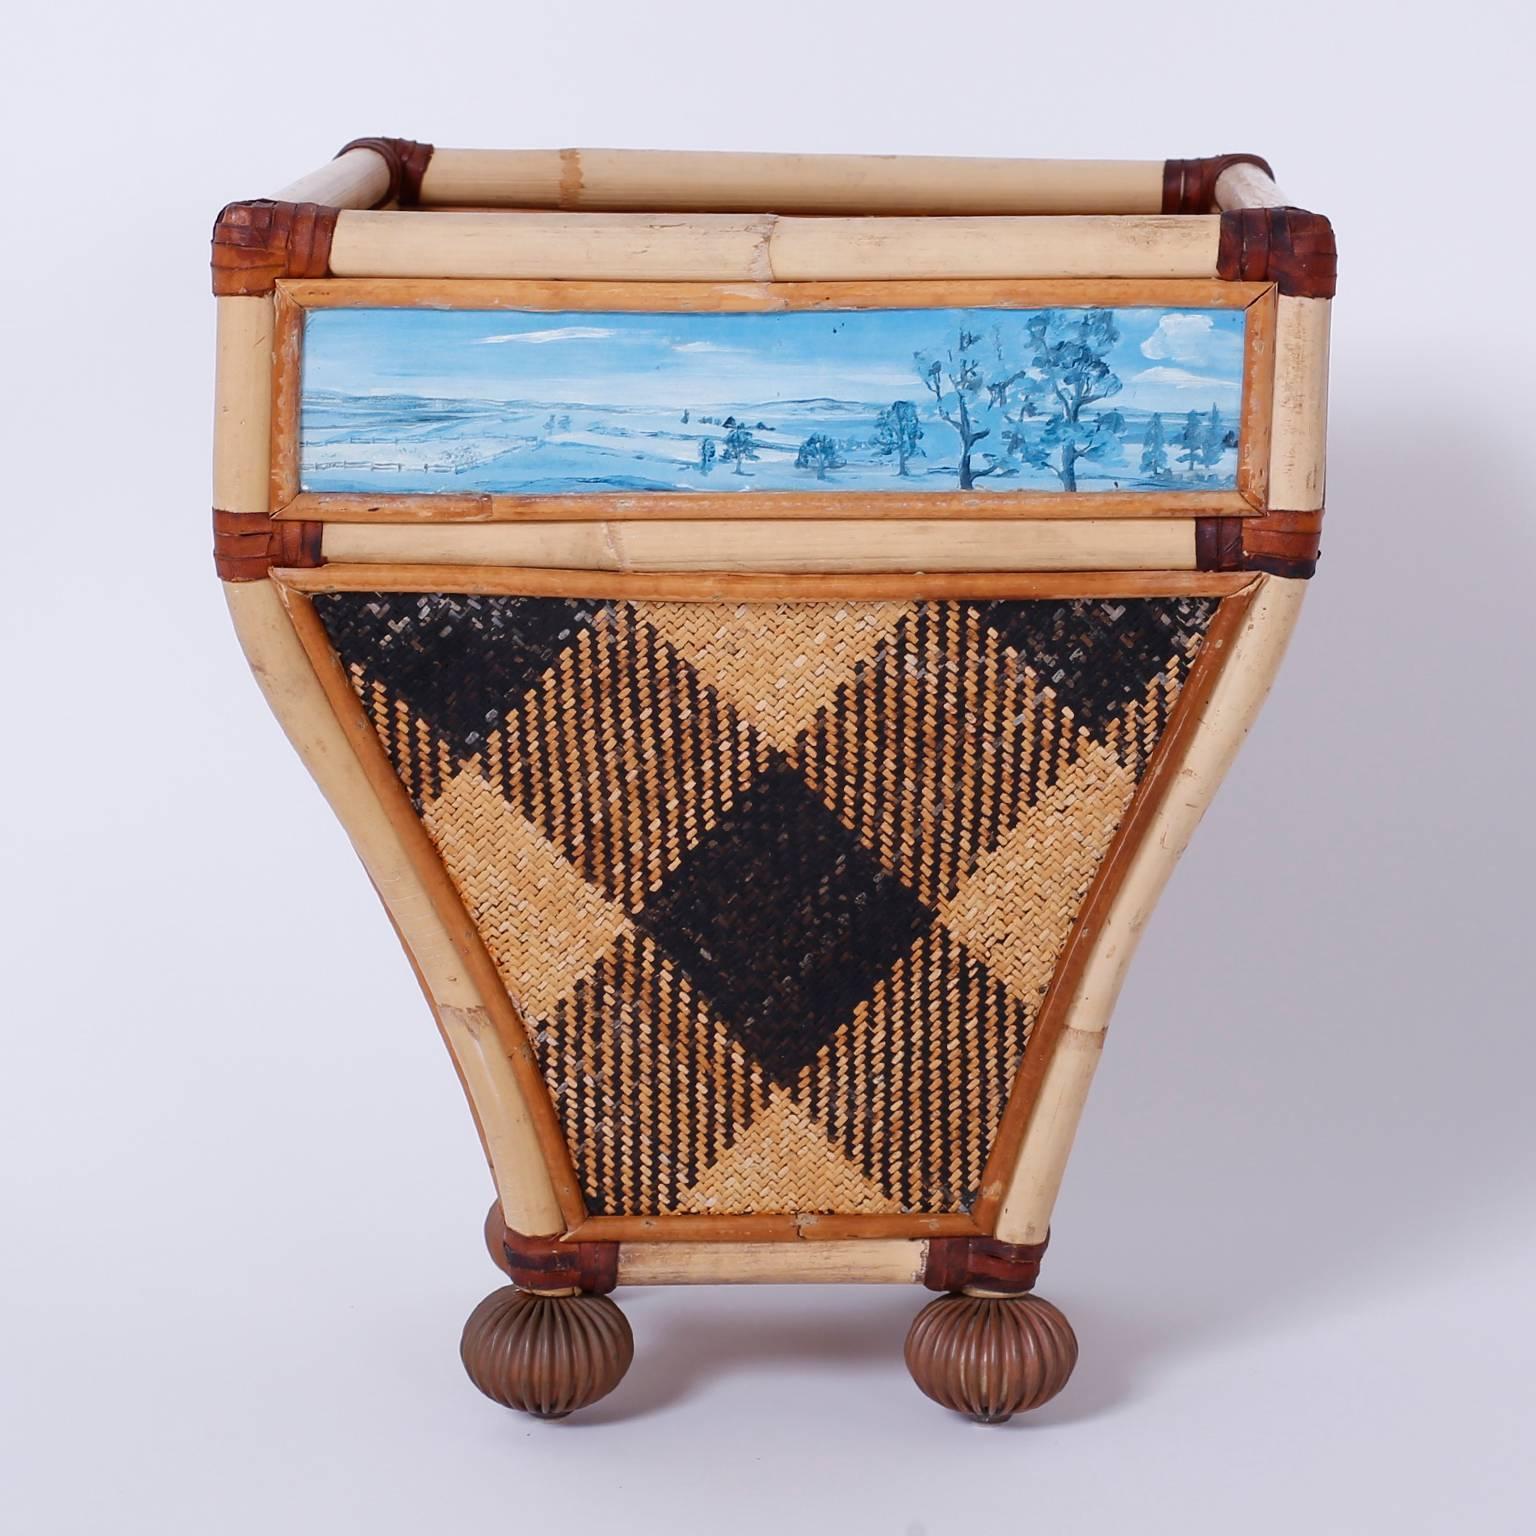 Well-dressed waste basket crafted with bamboo, wicker and
reed. Featuring four monochrome landscapes with woven argyle side panels and beaded bun feet.